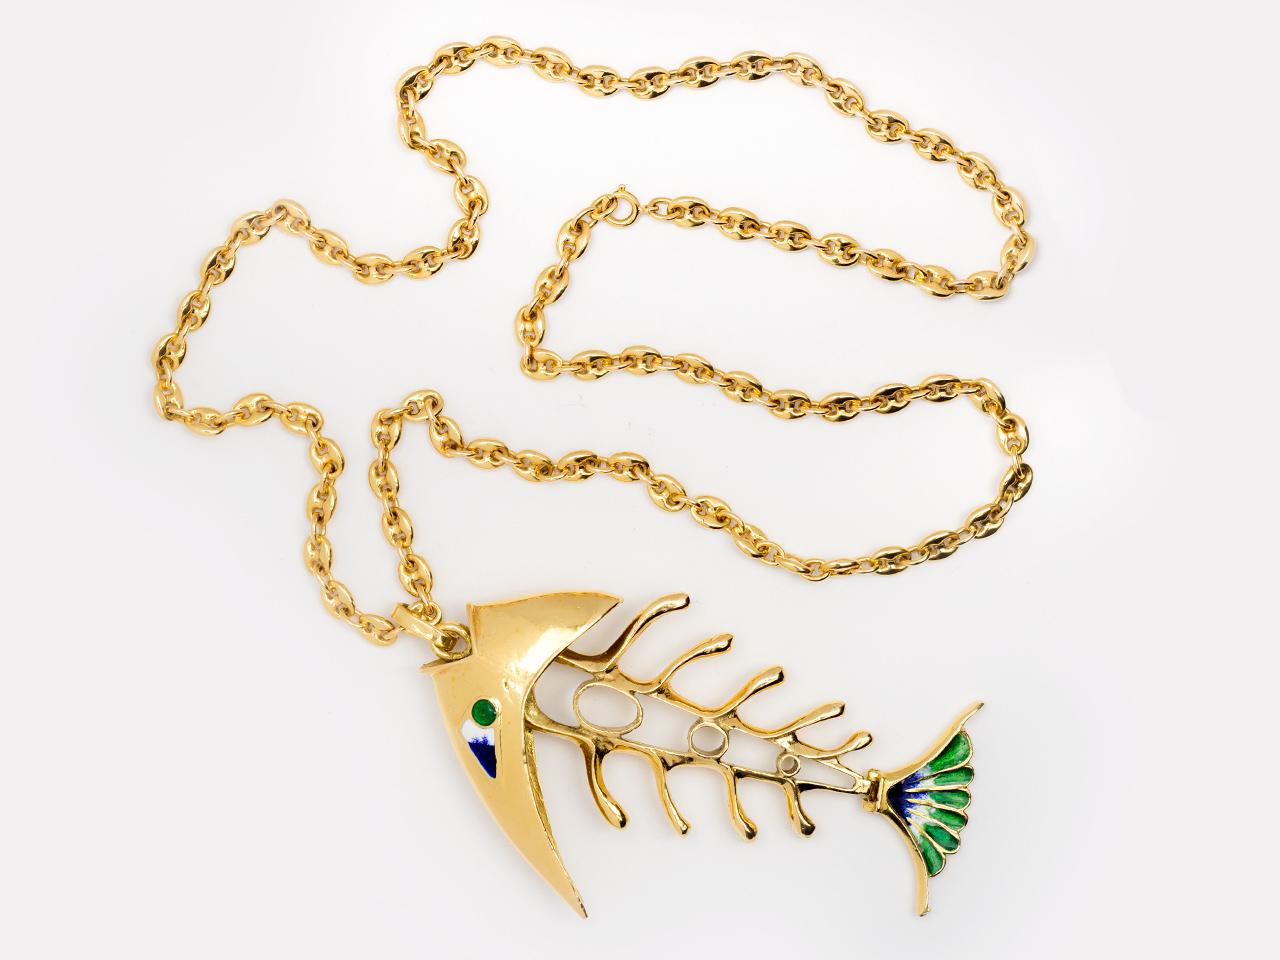 18k gold  articulated  and enameled fish pendant necklace.


